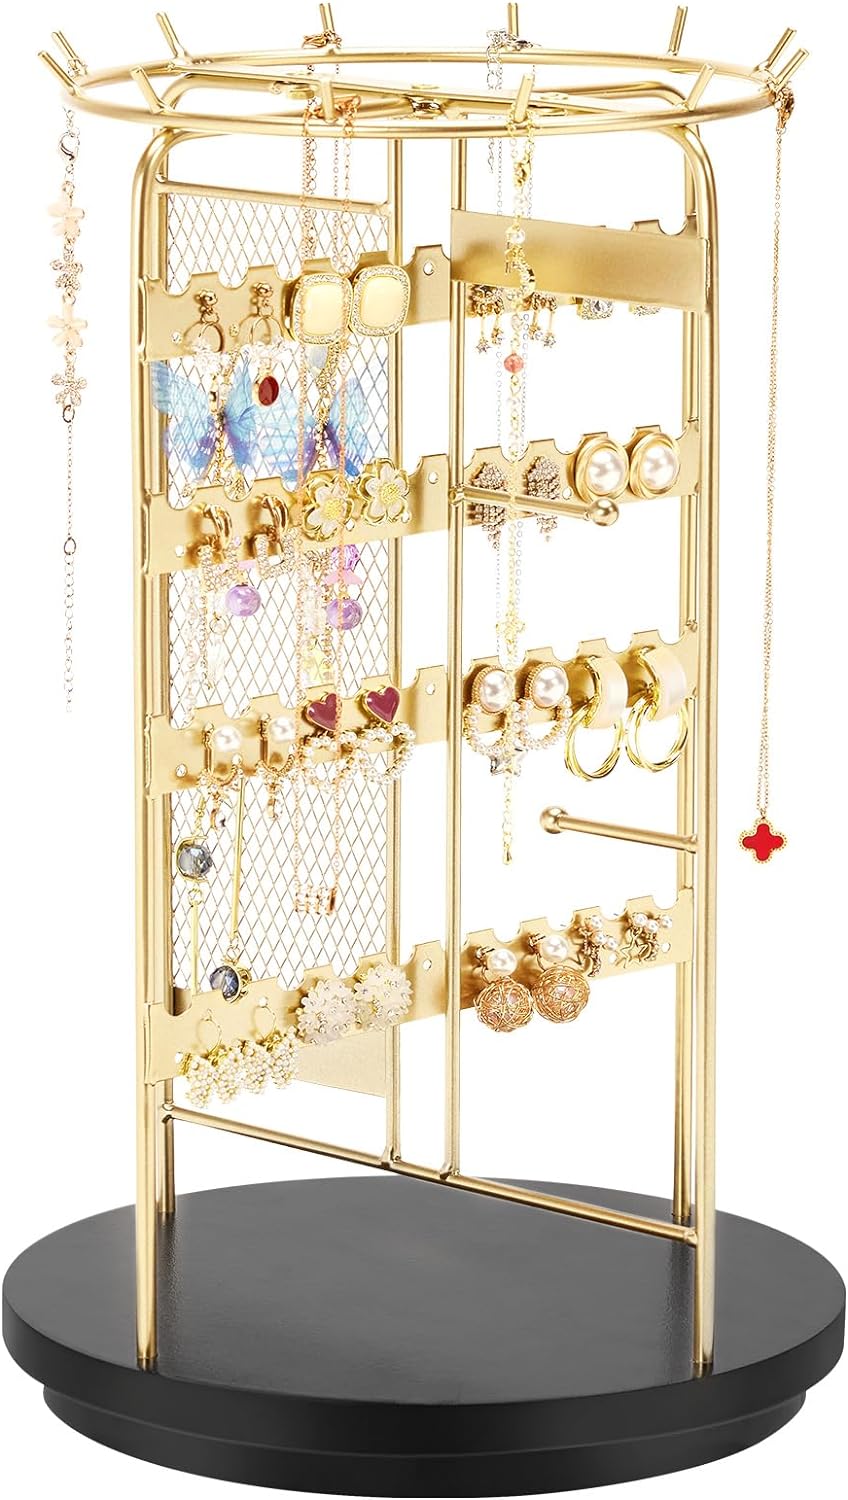 Homde 360 Rotating Jewelry Stand | Hold up to 100 Pairs of Earrings and 34 Necklaces | Jewelry Tower Tree Earring Necklace Bracelet Display Organizer for Women Girls (Black + Gold)